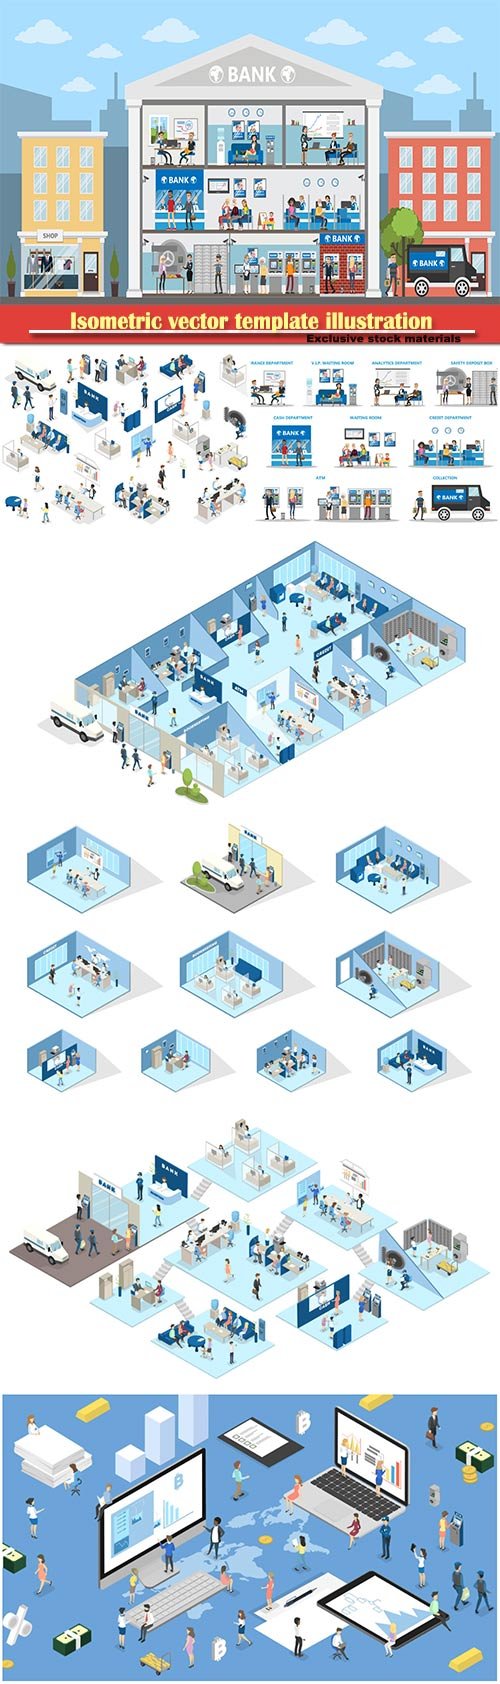 Isometric vector template business illustration # 45